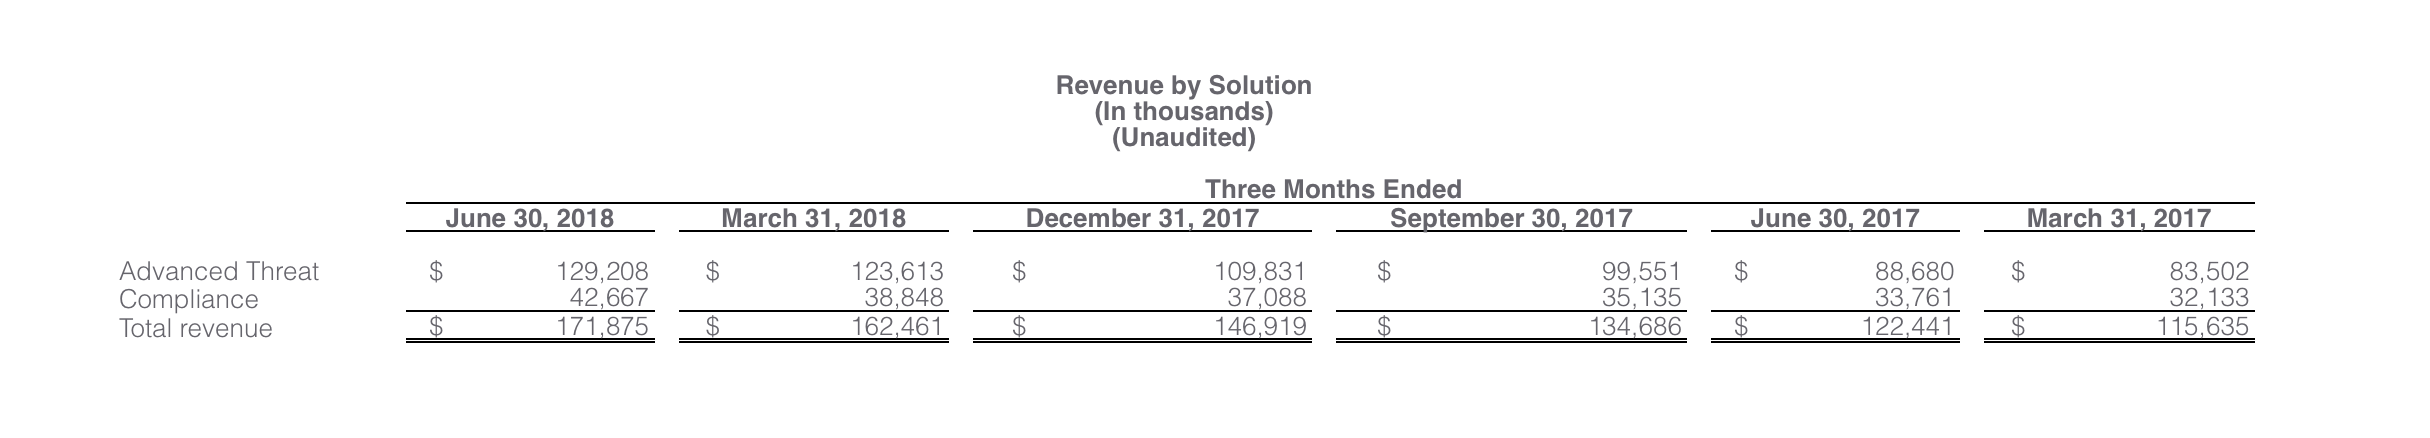 Proofpoint revenue by solutions report